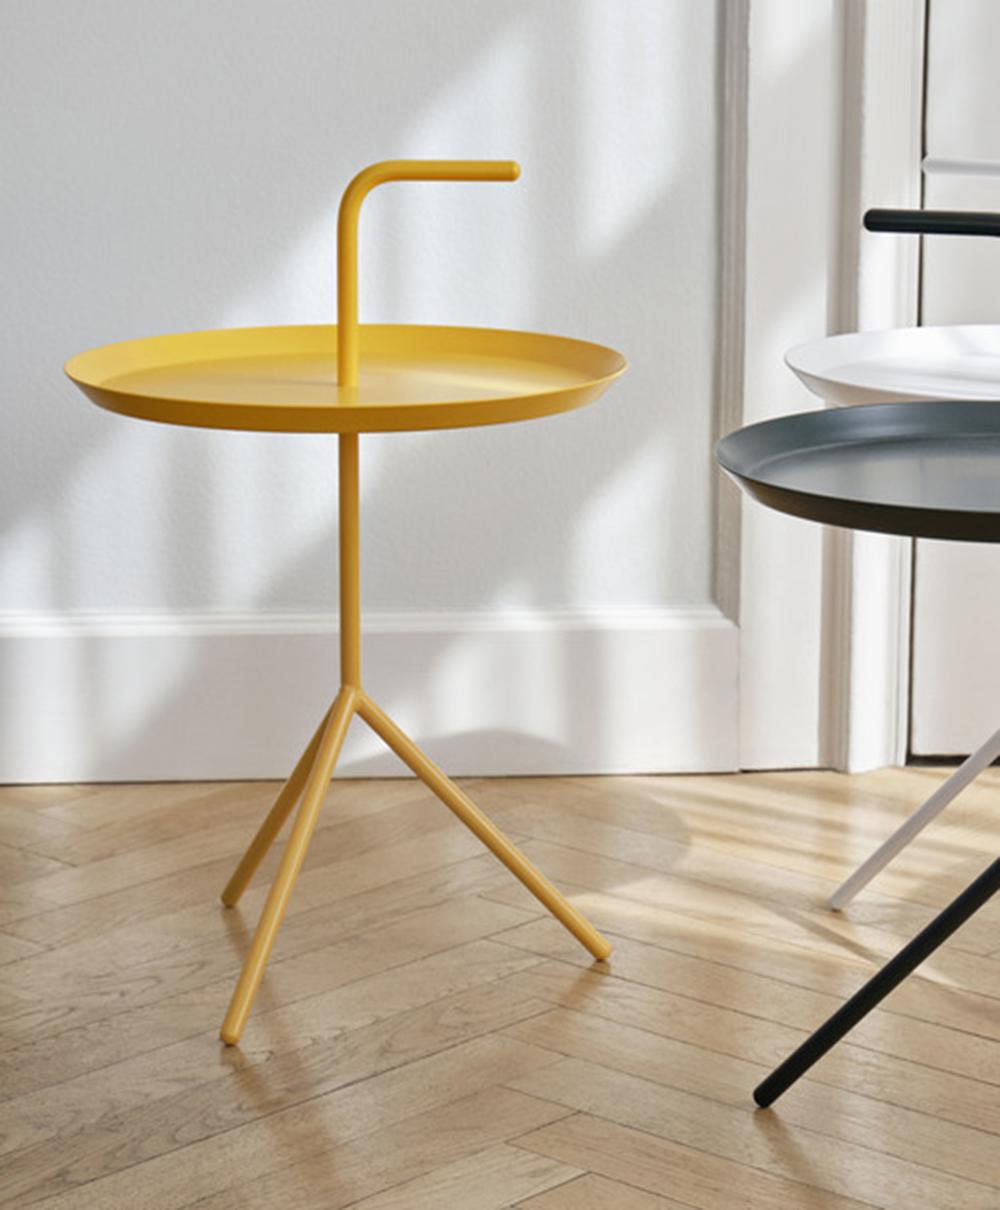 Thomas Bentzen’s portable side table is aptly named ‘Don’t Leave Me’. Abbreviated to DLM, it features a convenient handle that allows the metal table to be carried from room to room. Although it has a lightweight and portable structure, the three